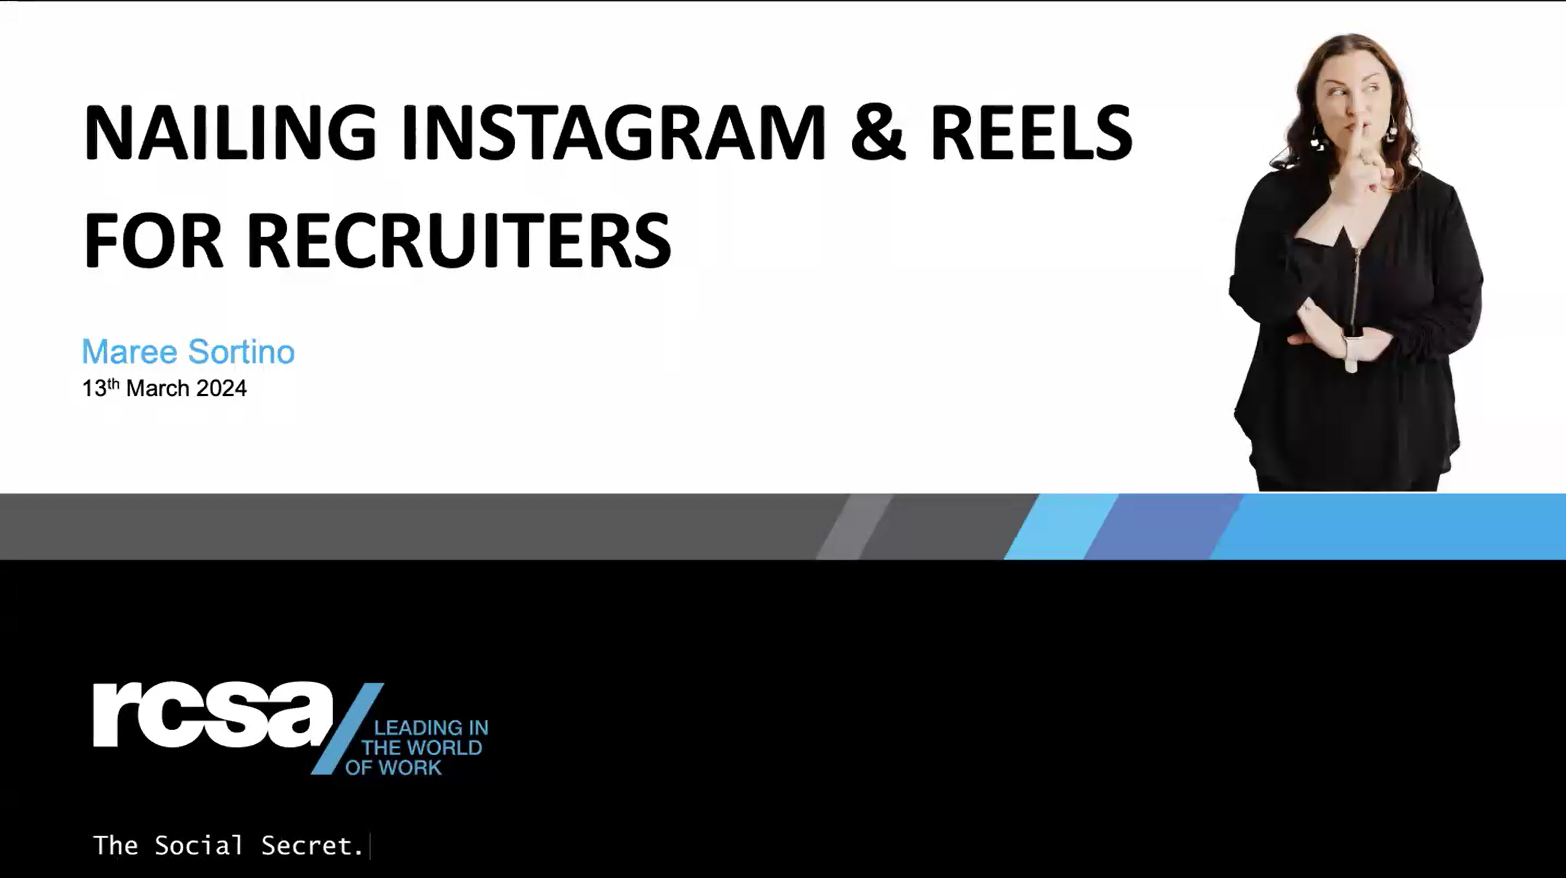 Nailing Instagram & Reels for Recruiters